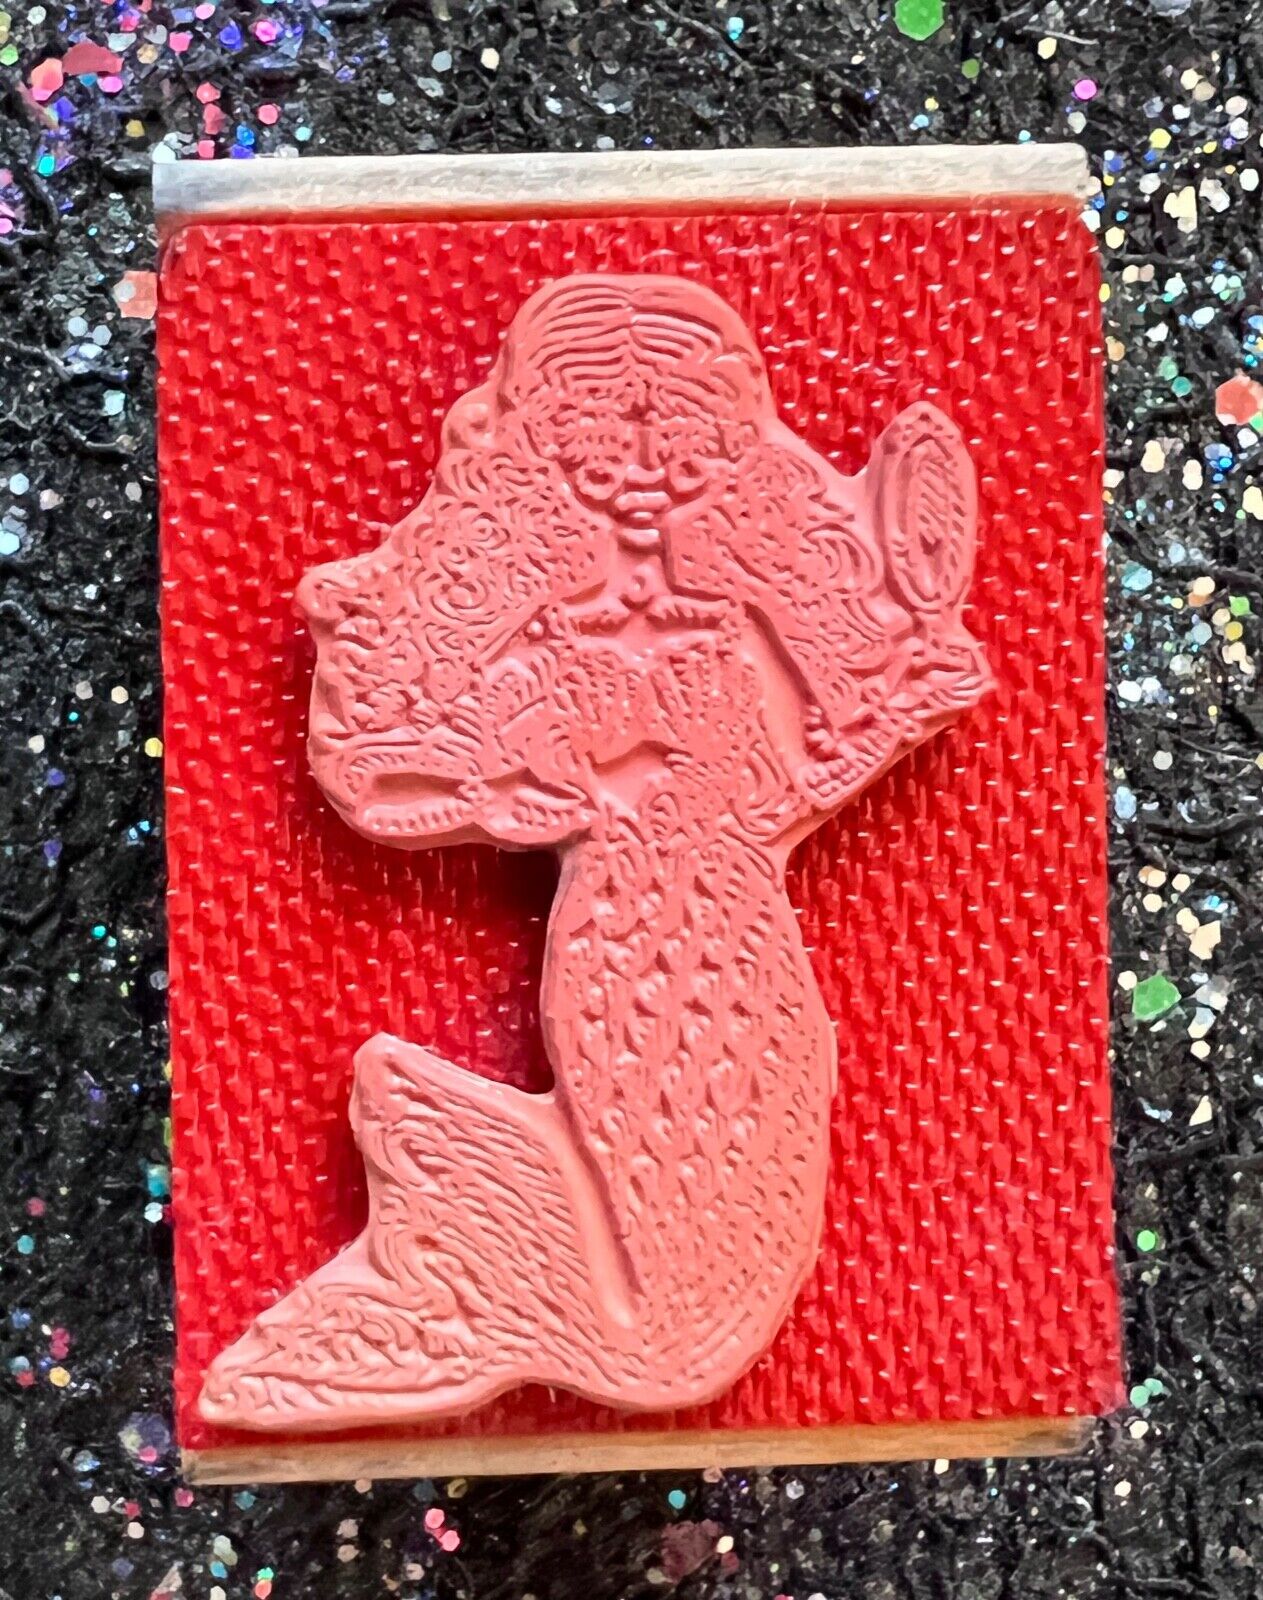 Vintage Rubber Stamp "Pretty Little Mermaid" by Gail Haley for Kidstamps '86